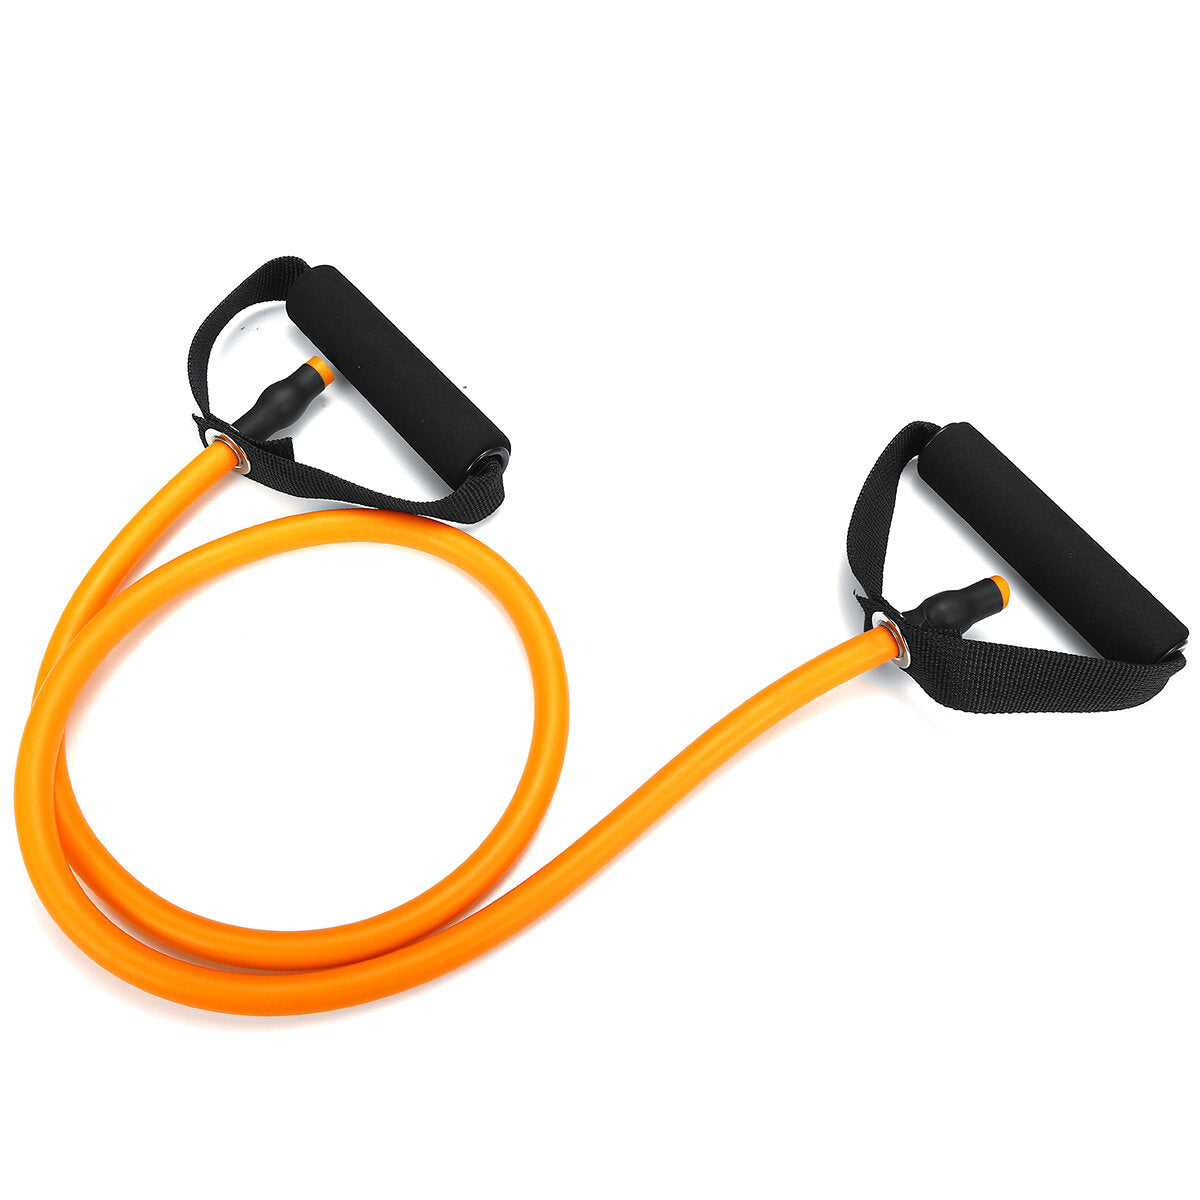 1Pc 10/15/20/25/30/35/40lbs Resistance Bands Fitness Muscle Training Exercise Bands